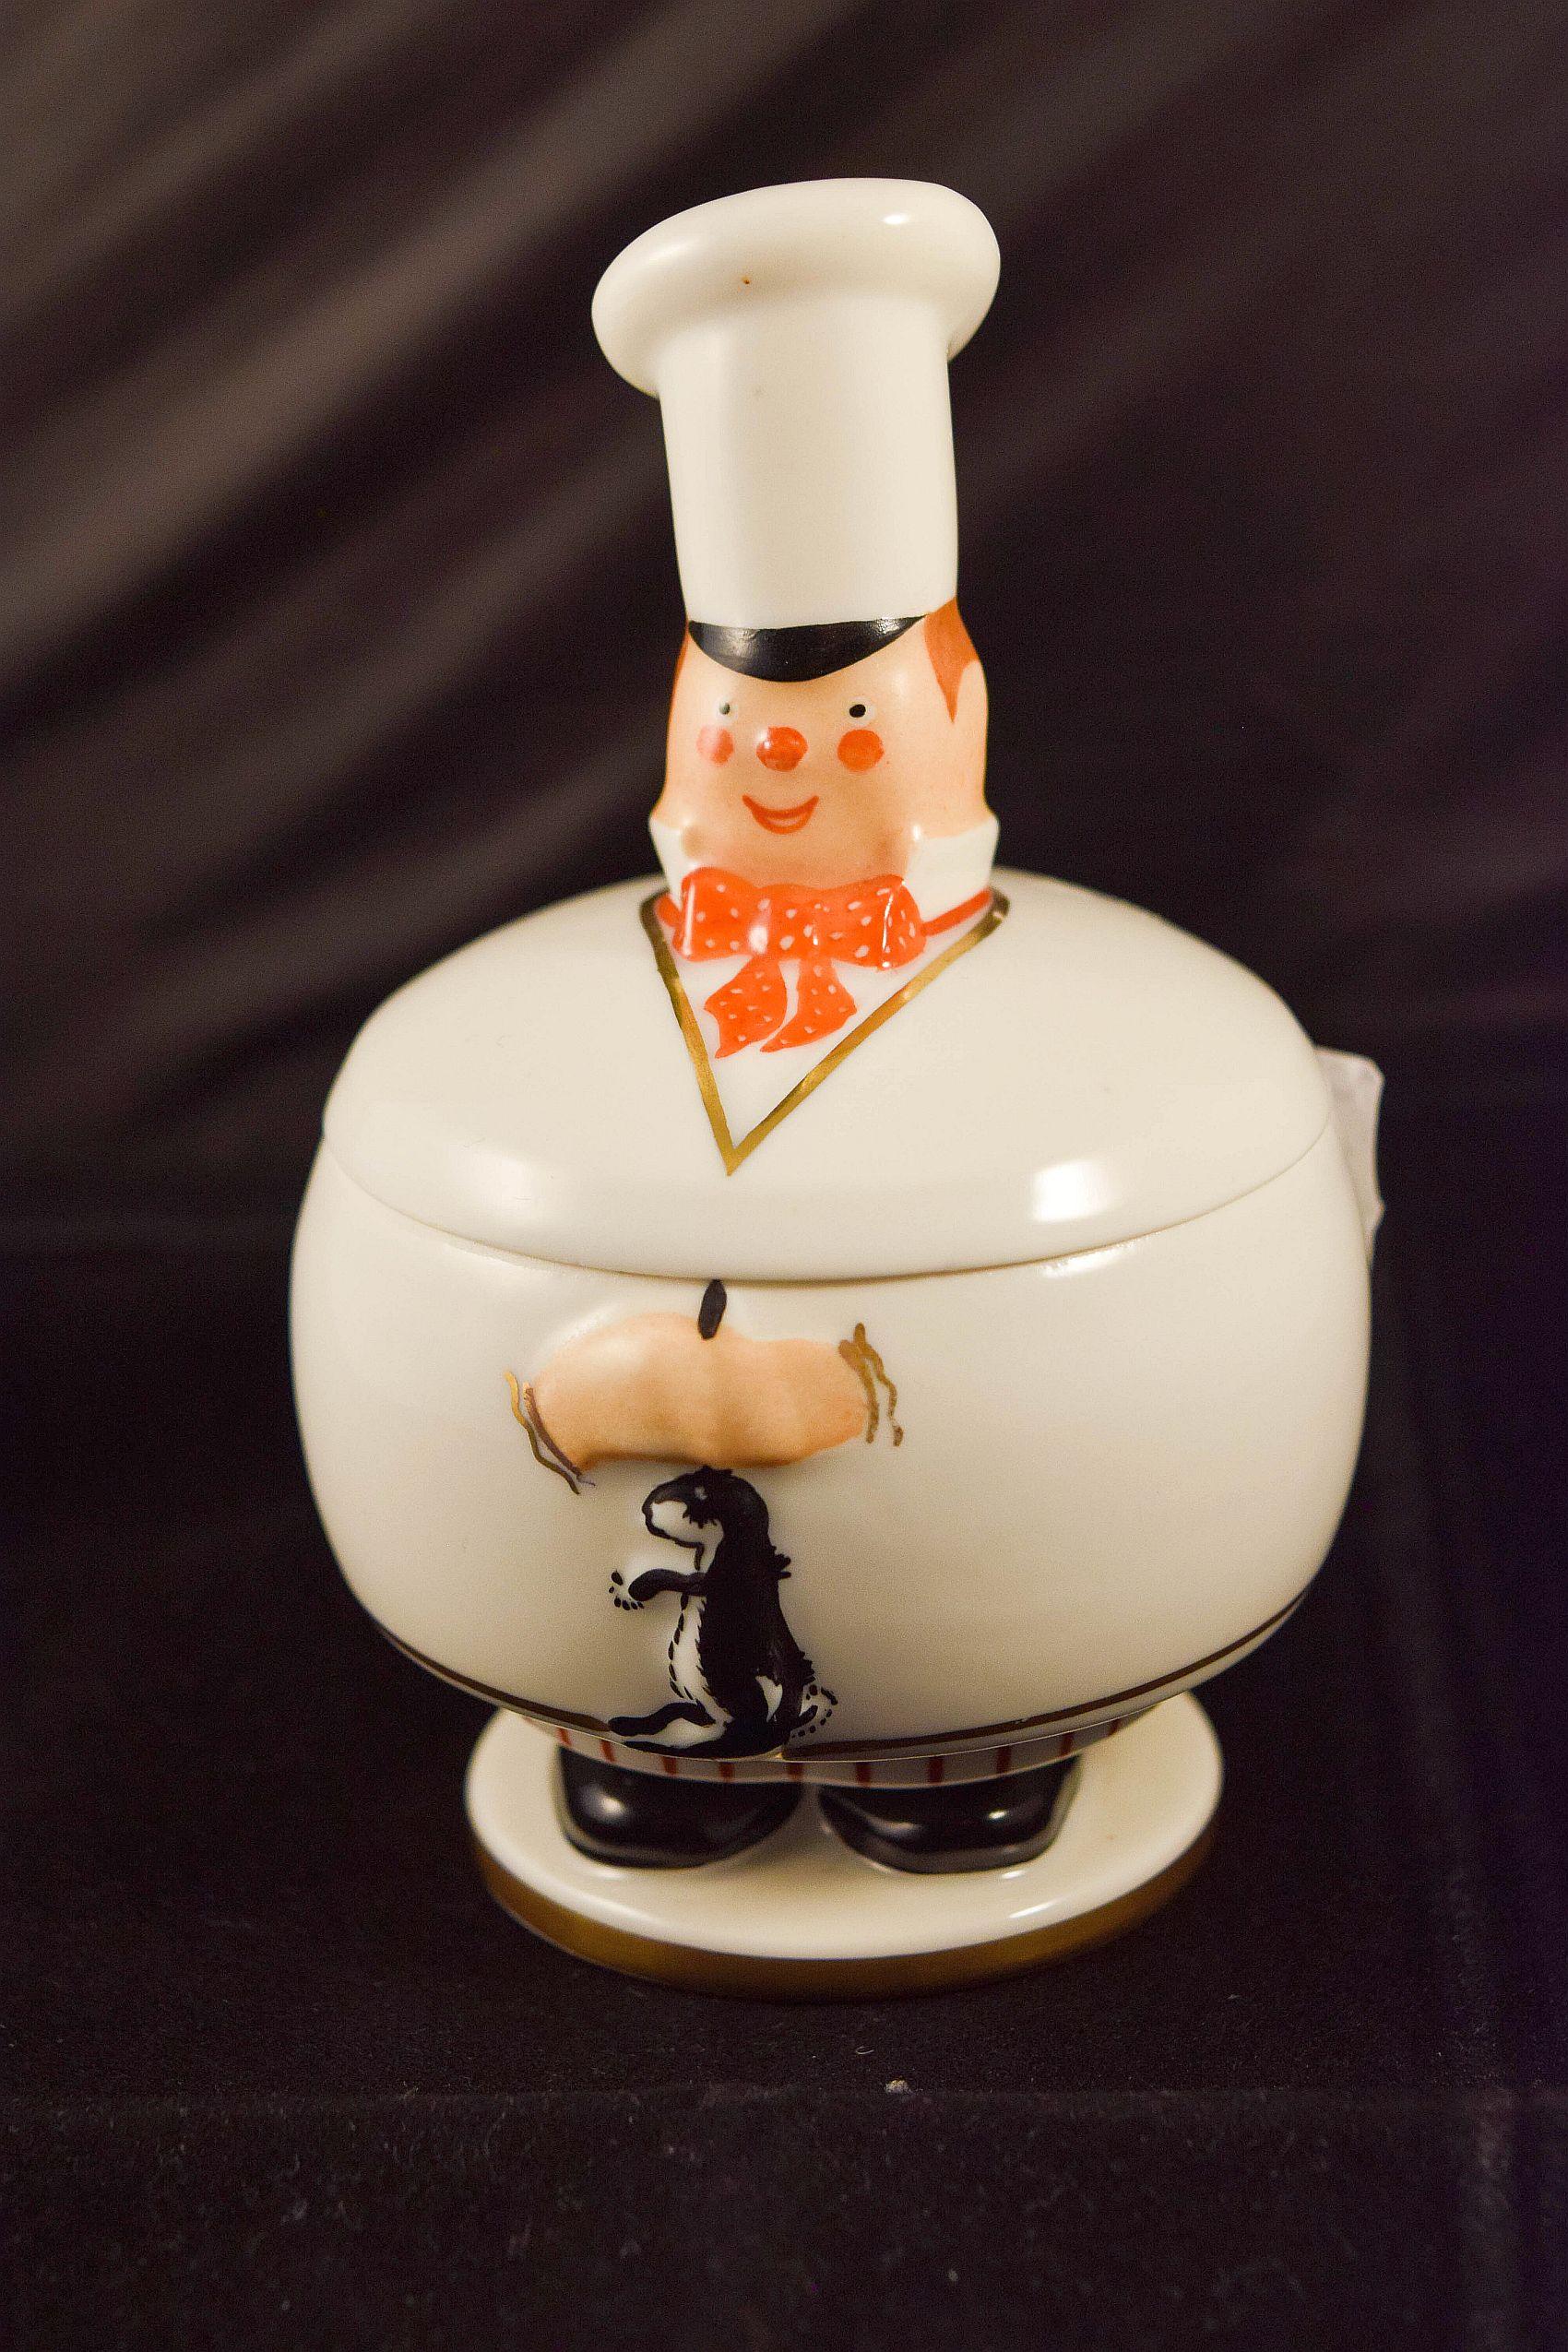 Robj china figurative village counsel rare  jam jar set
The mayor the priest the cook  the bourgeois  the military man the forester make a set of polychrome enamel  gilt decorated porcelain jam jars .They are all in perfect condition and signed Robj